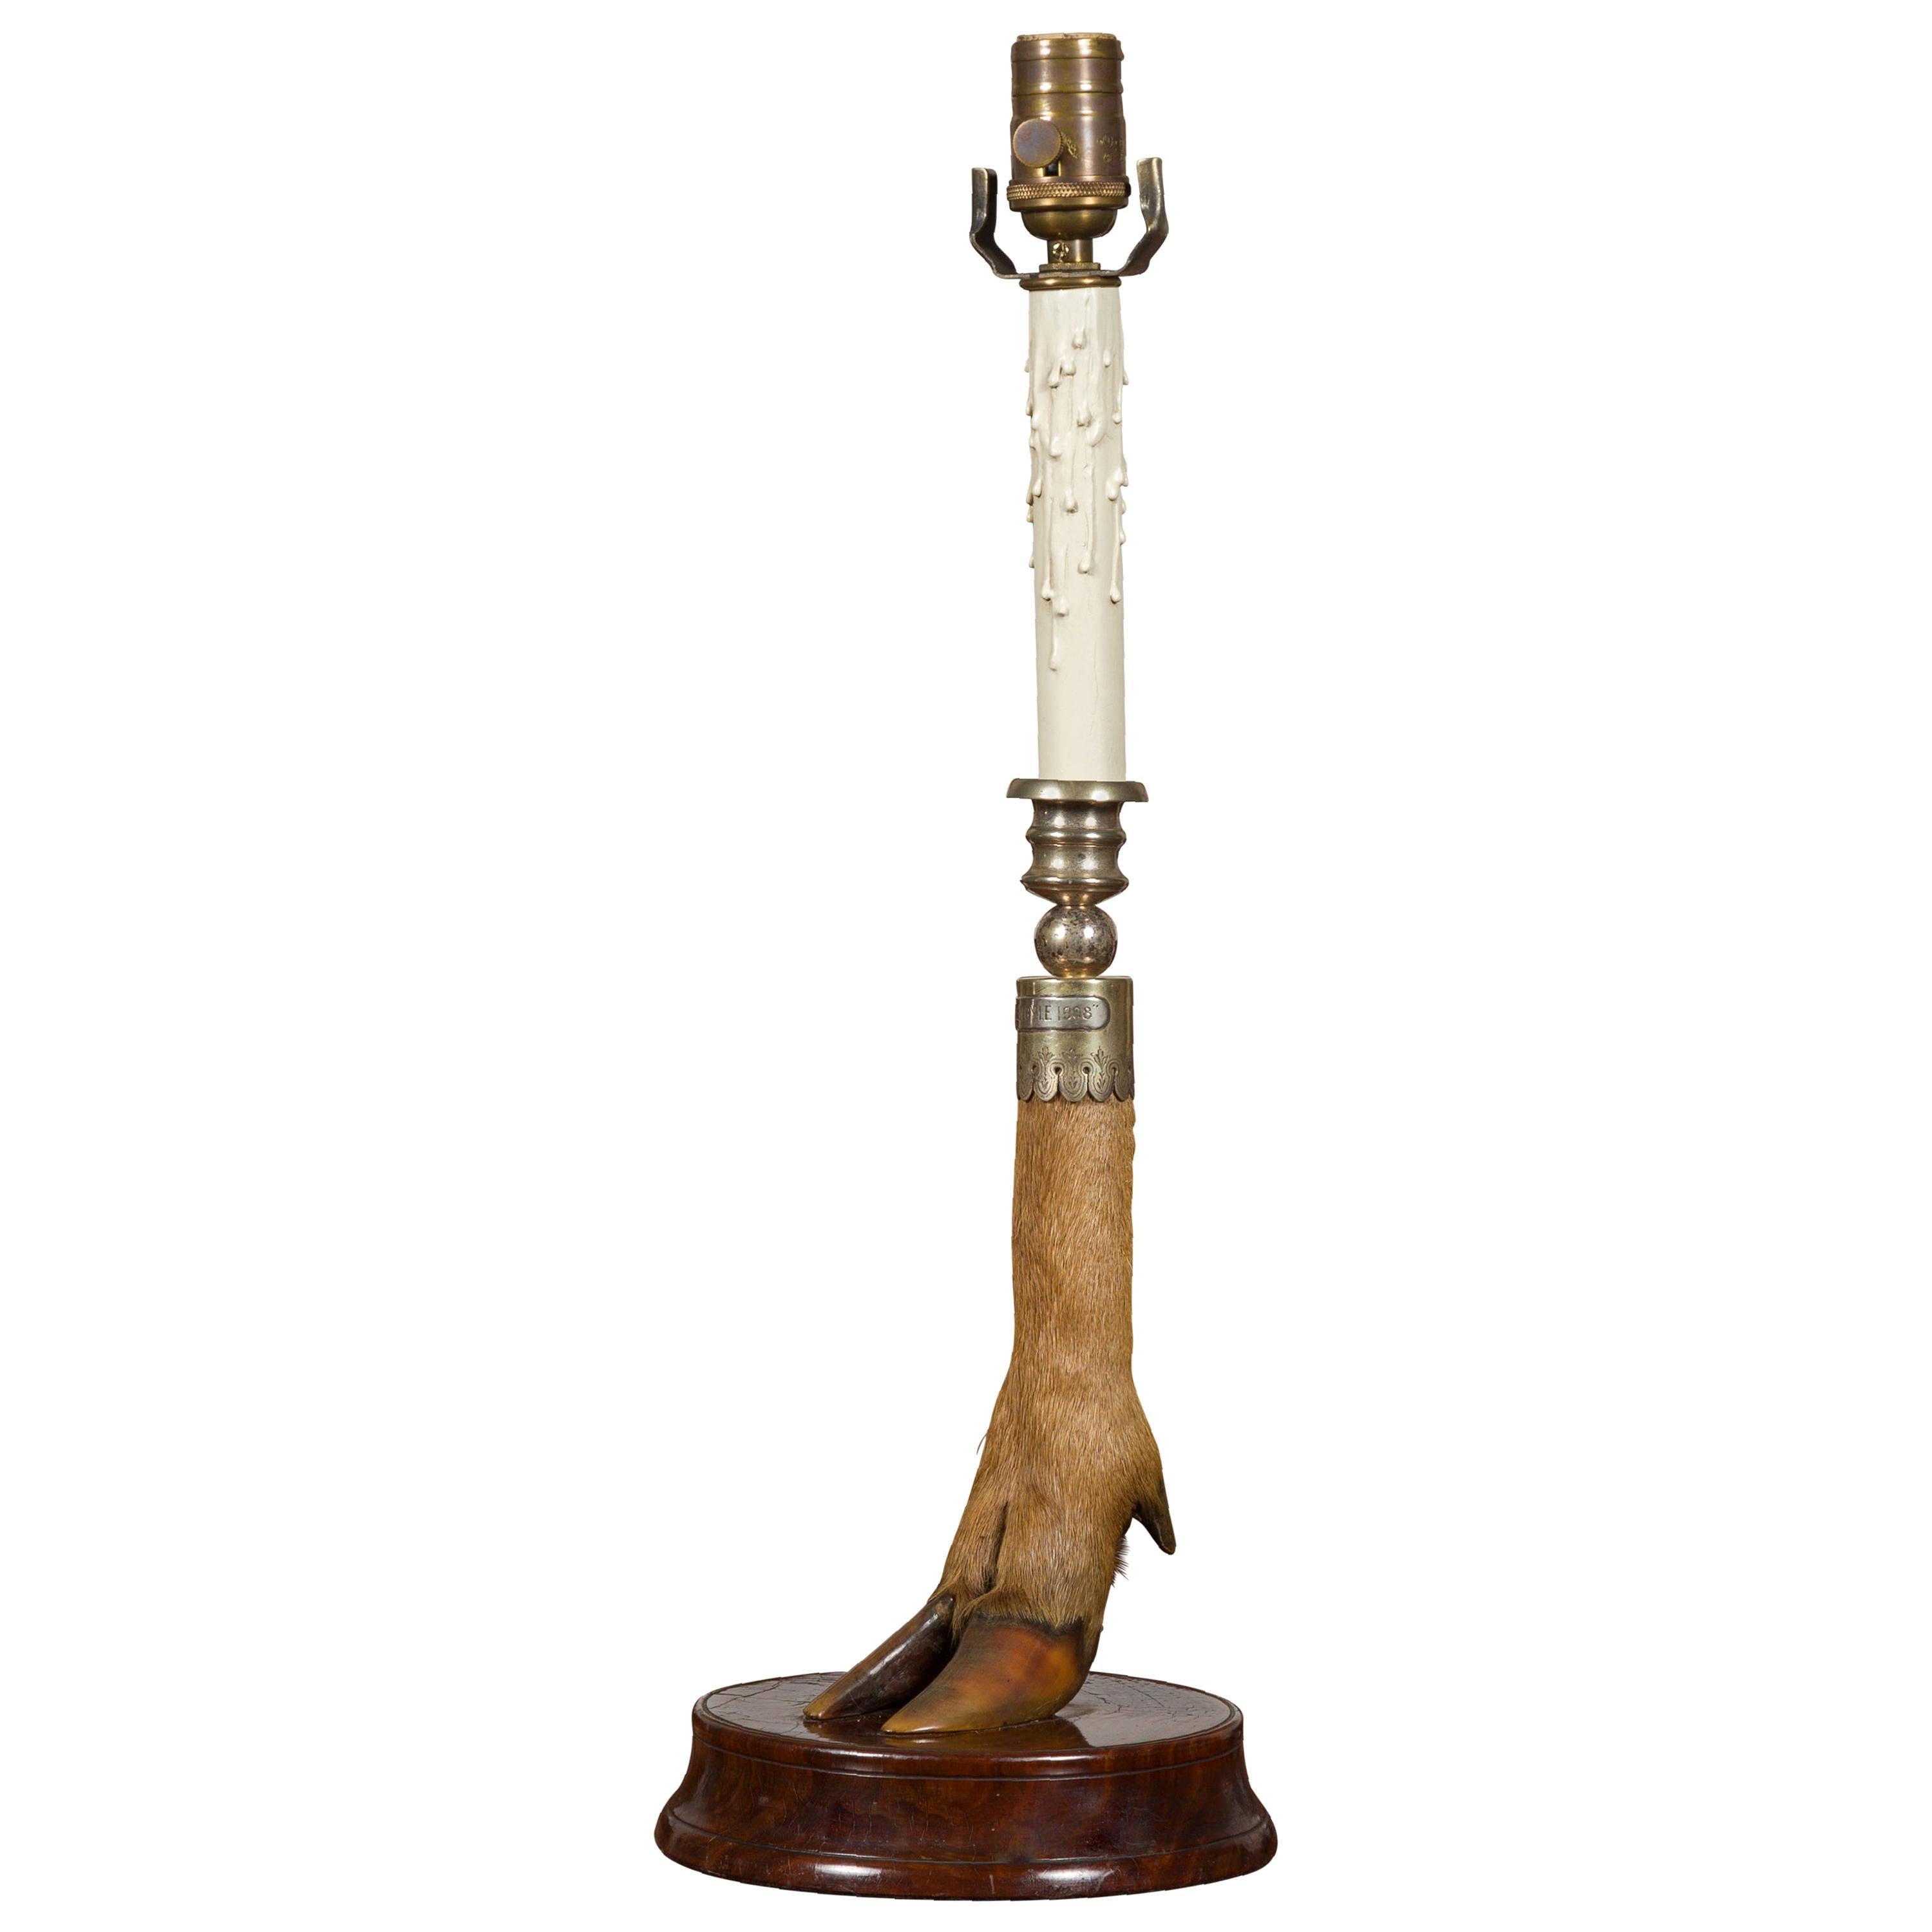 English Deer Leg Wired Table Lamp Dated 1908, Mounted on a Circular Wooden Base